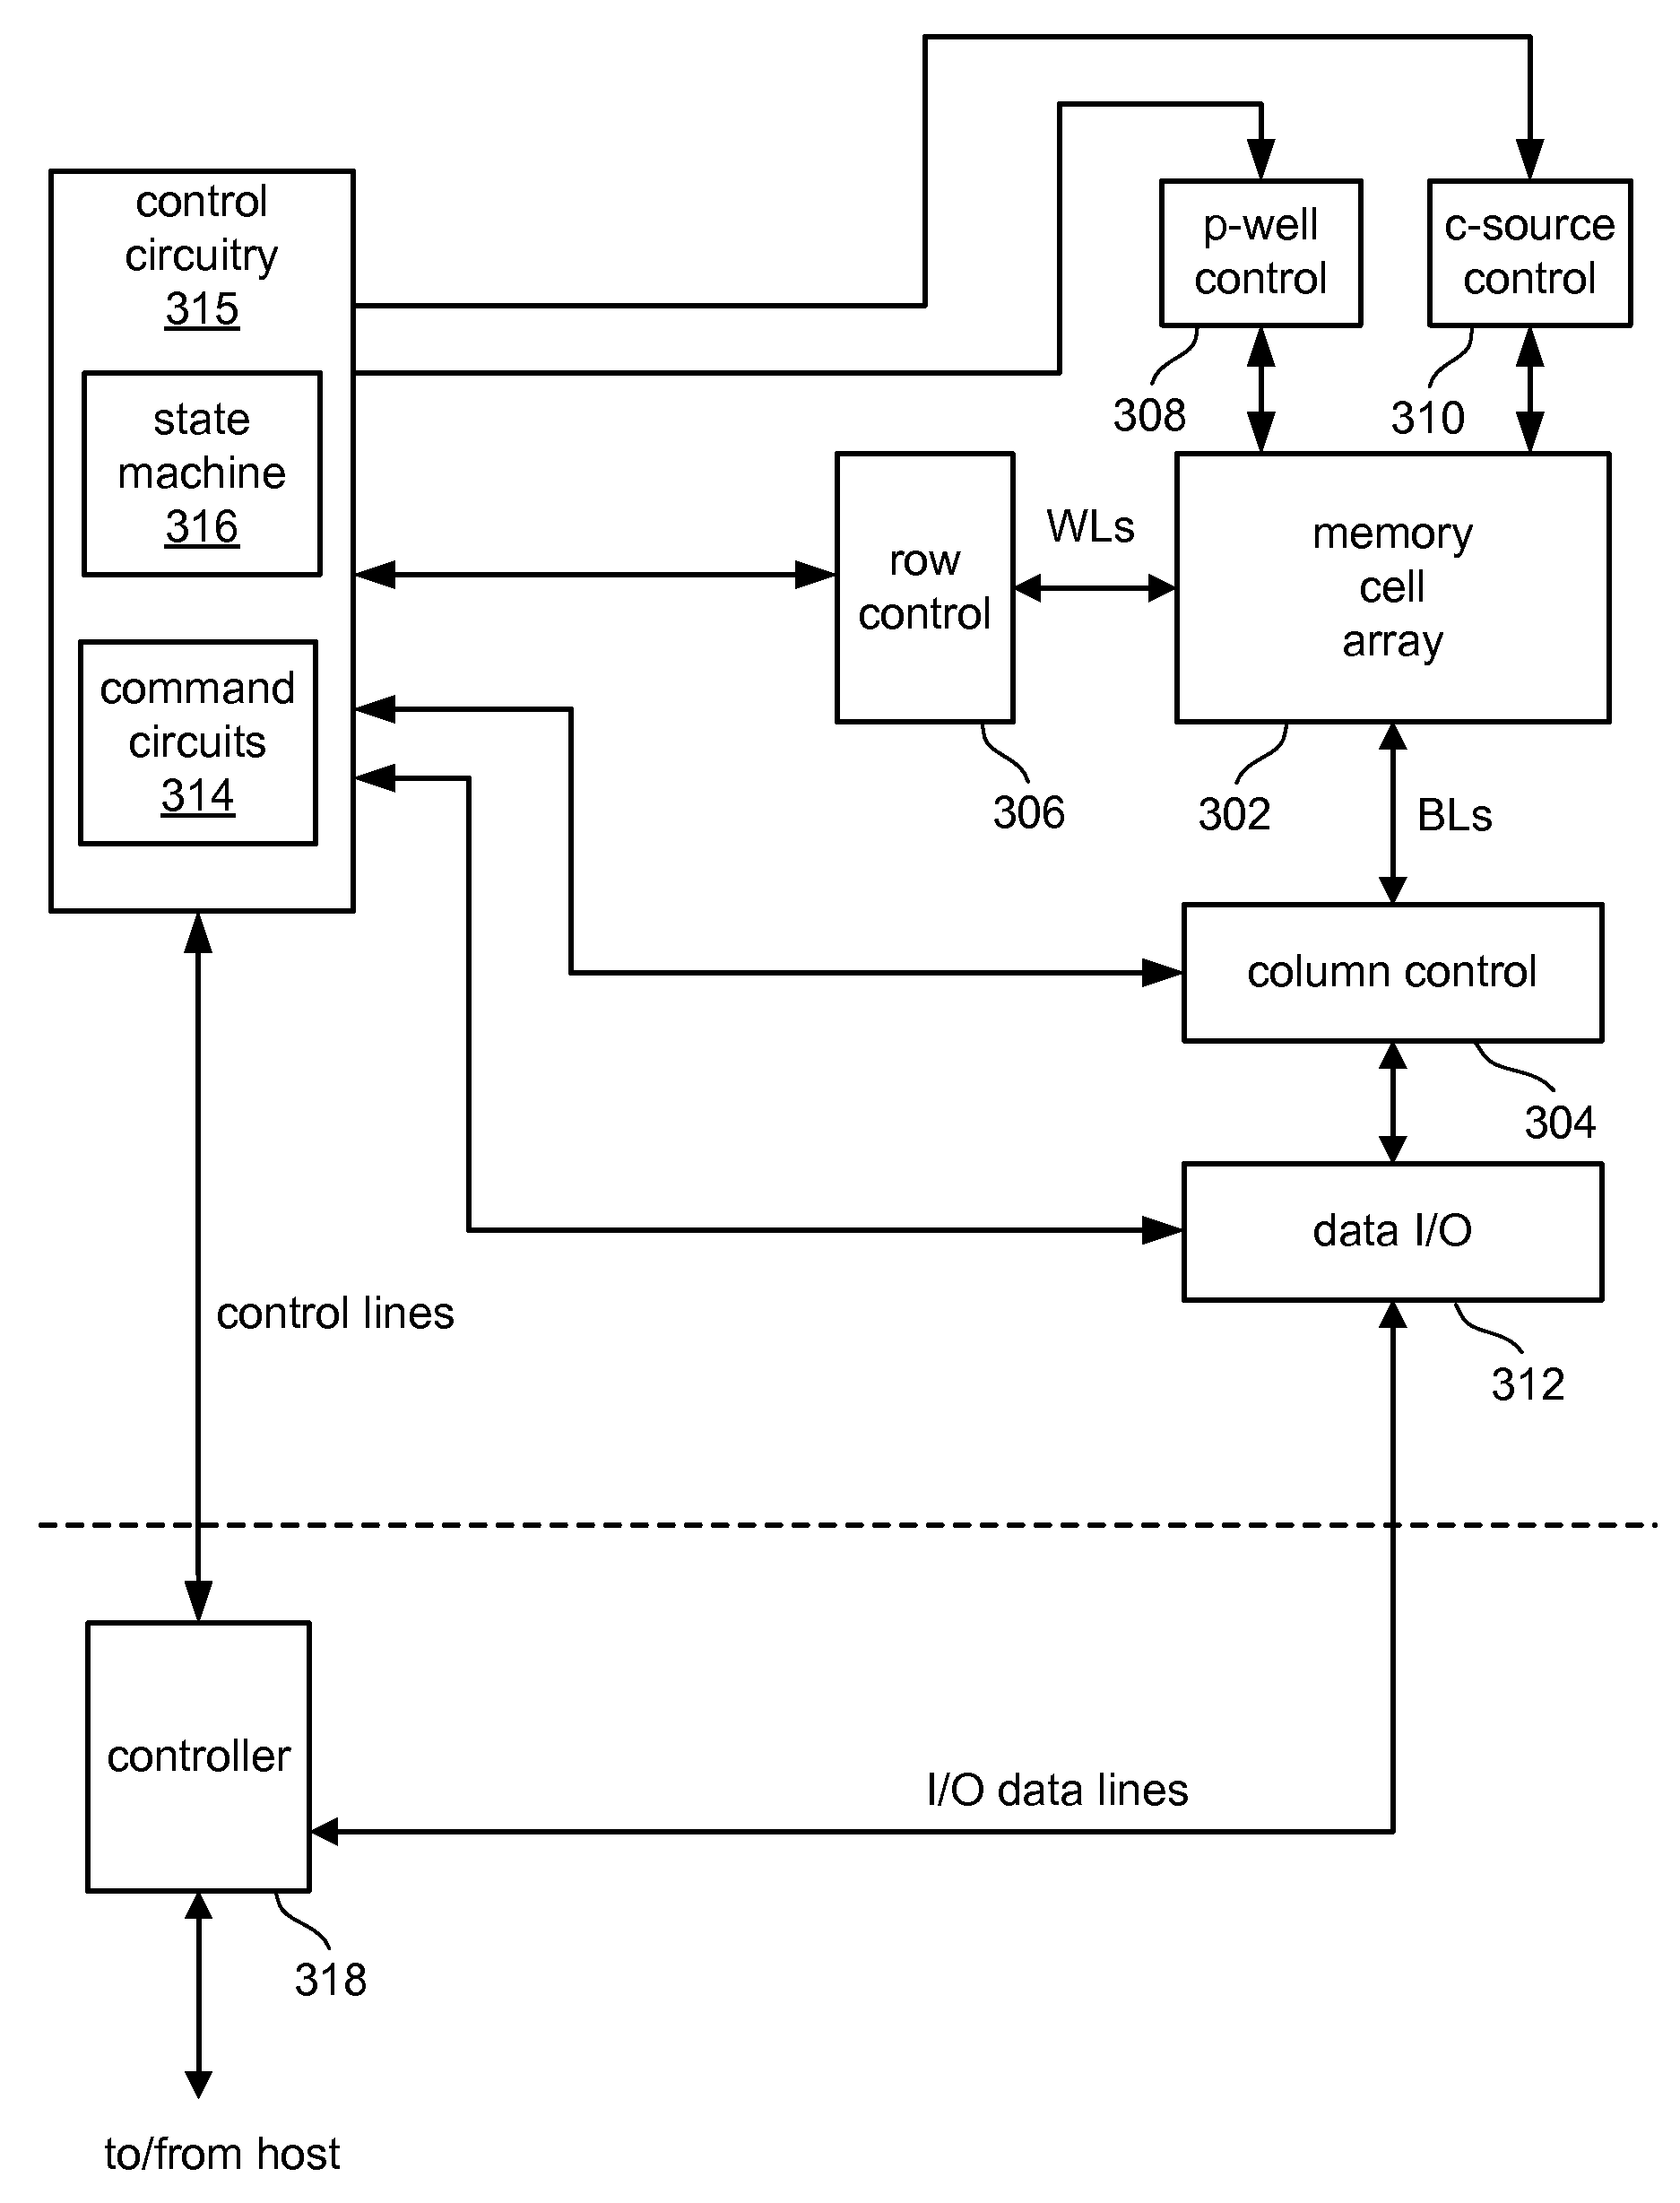 Systems for coarse/fine program verification in non-volatile memory using different reference levels for improved sensing